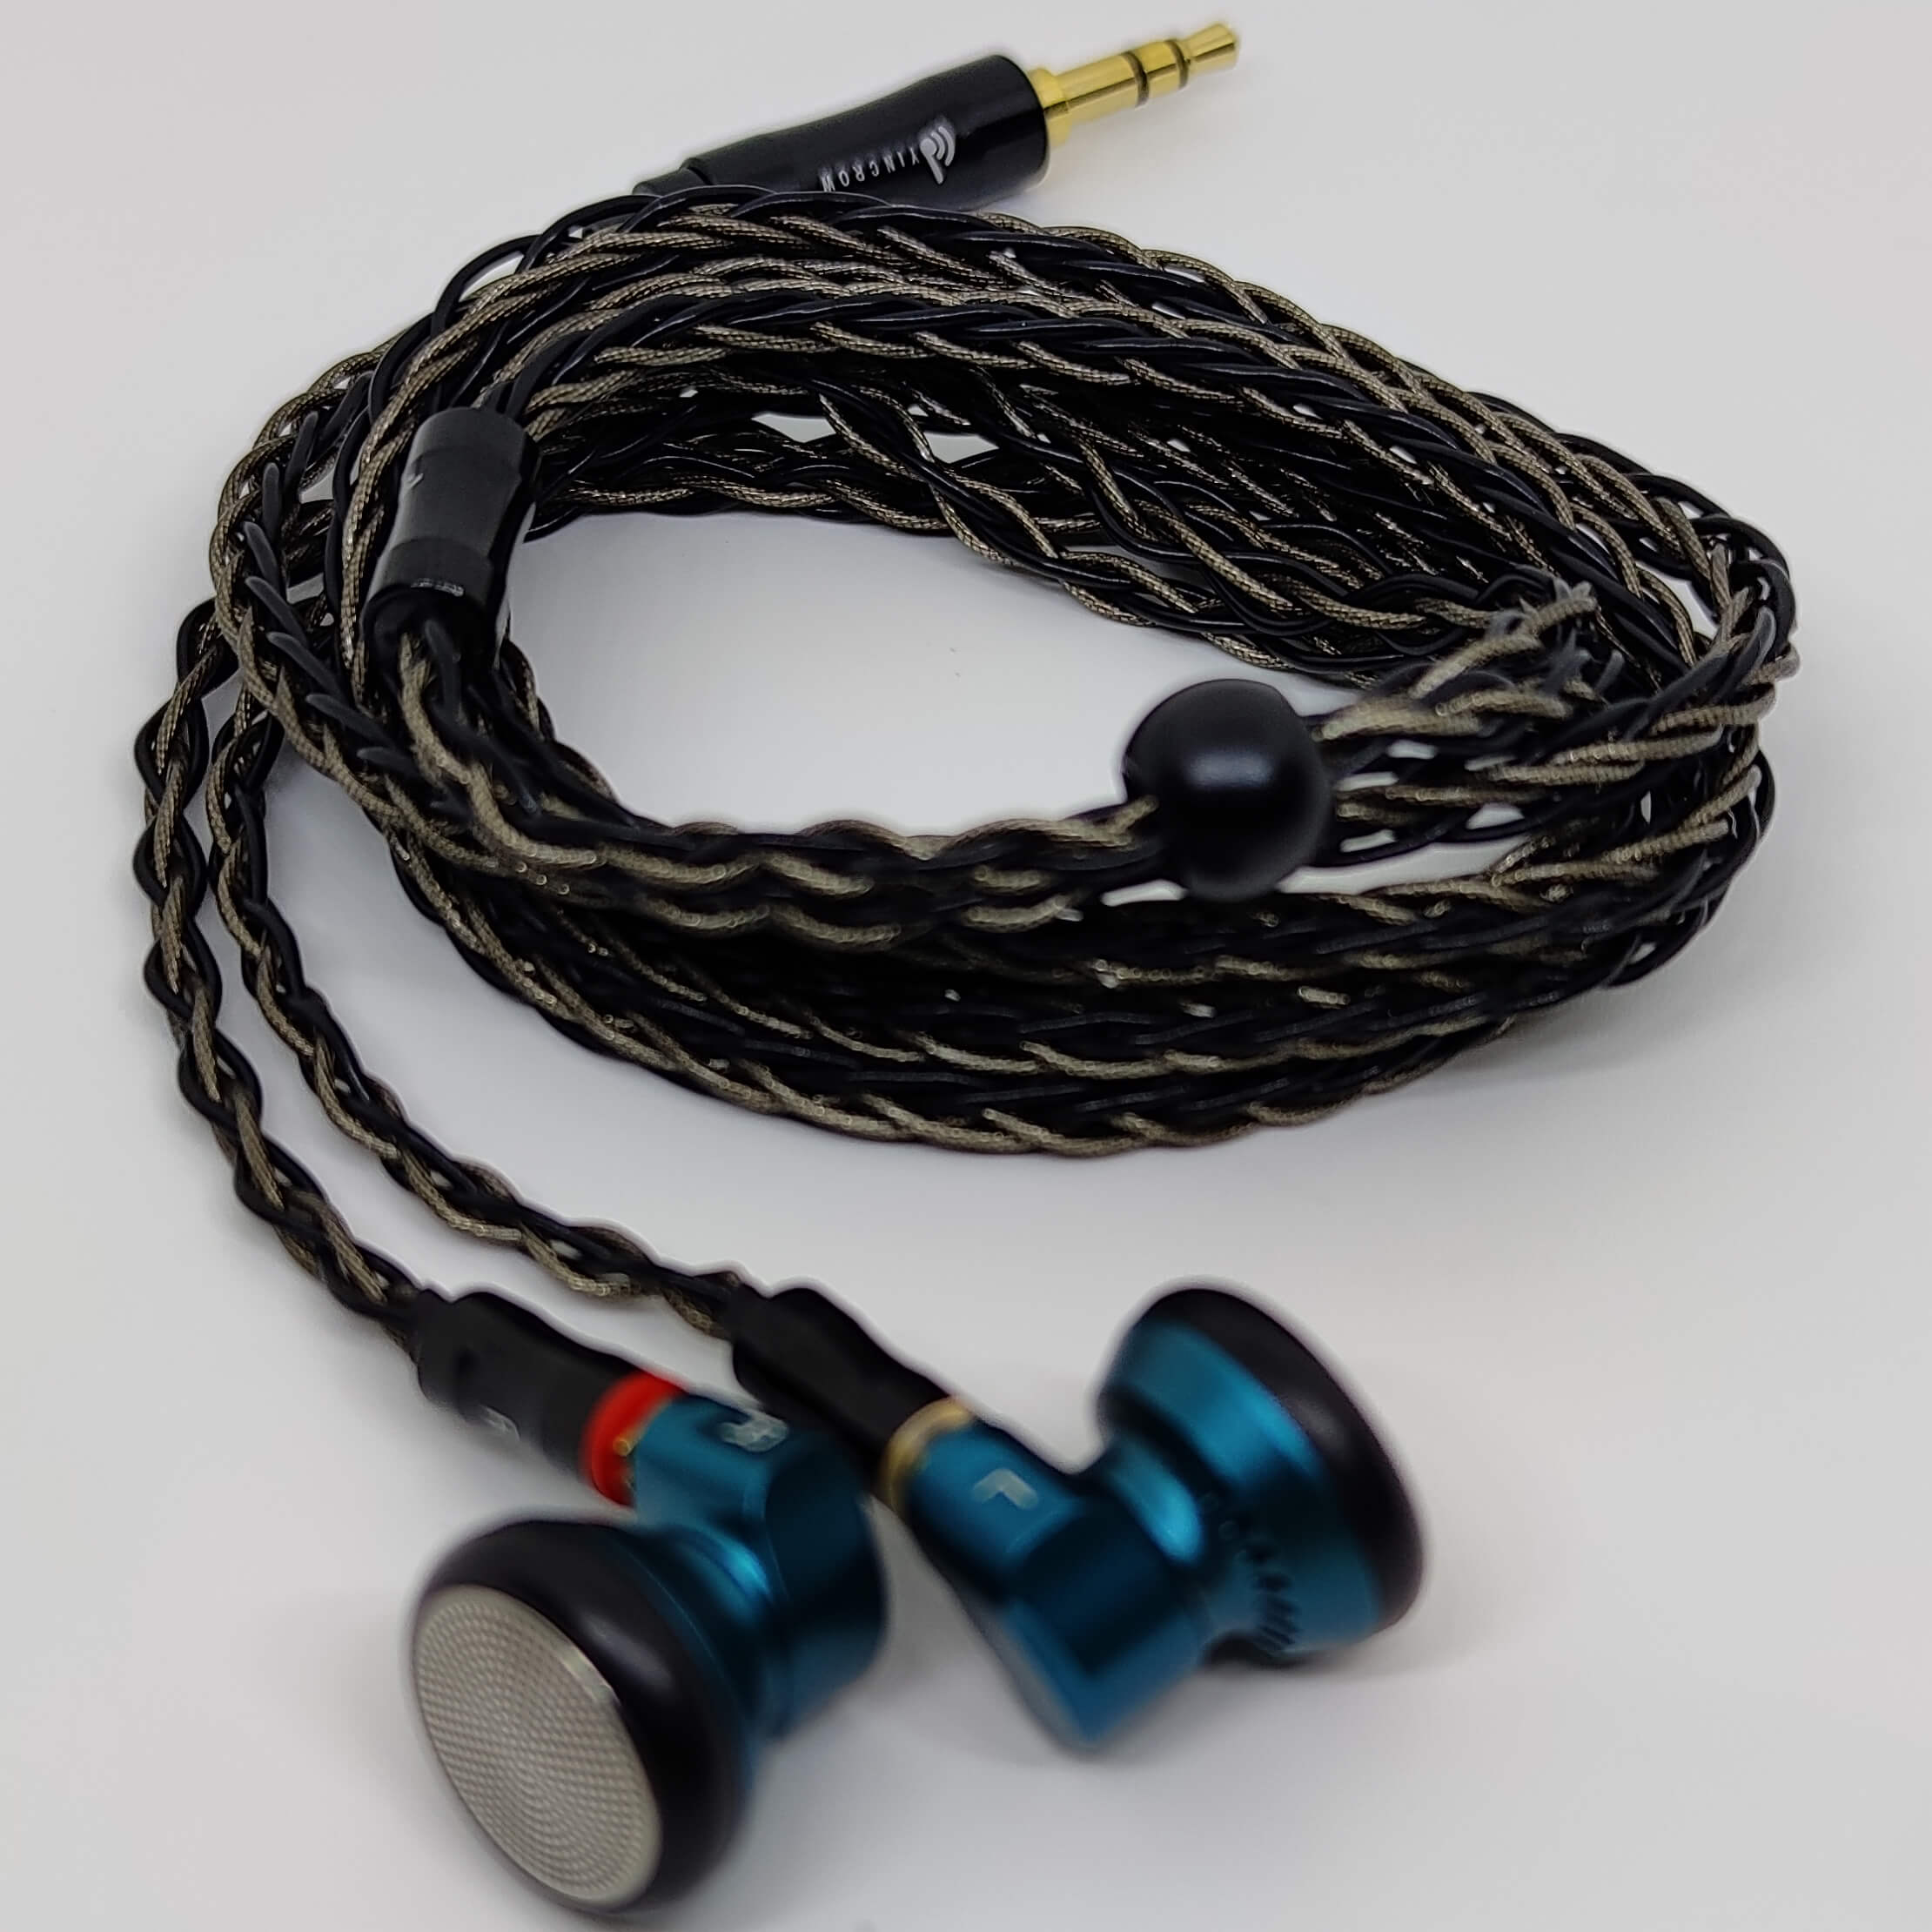 Buy Yincrow RW-2000 Earbud at HiFiNage in India with warranty.